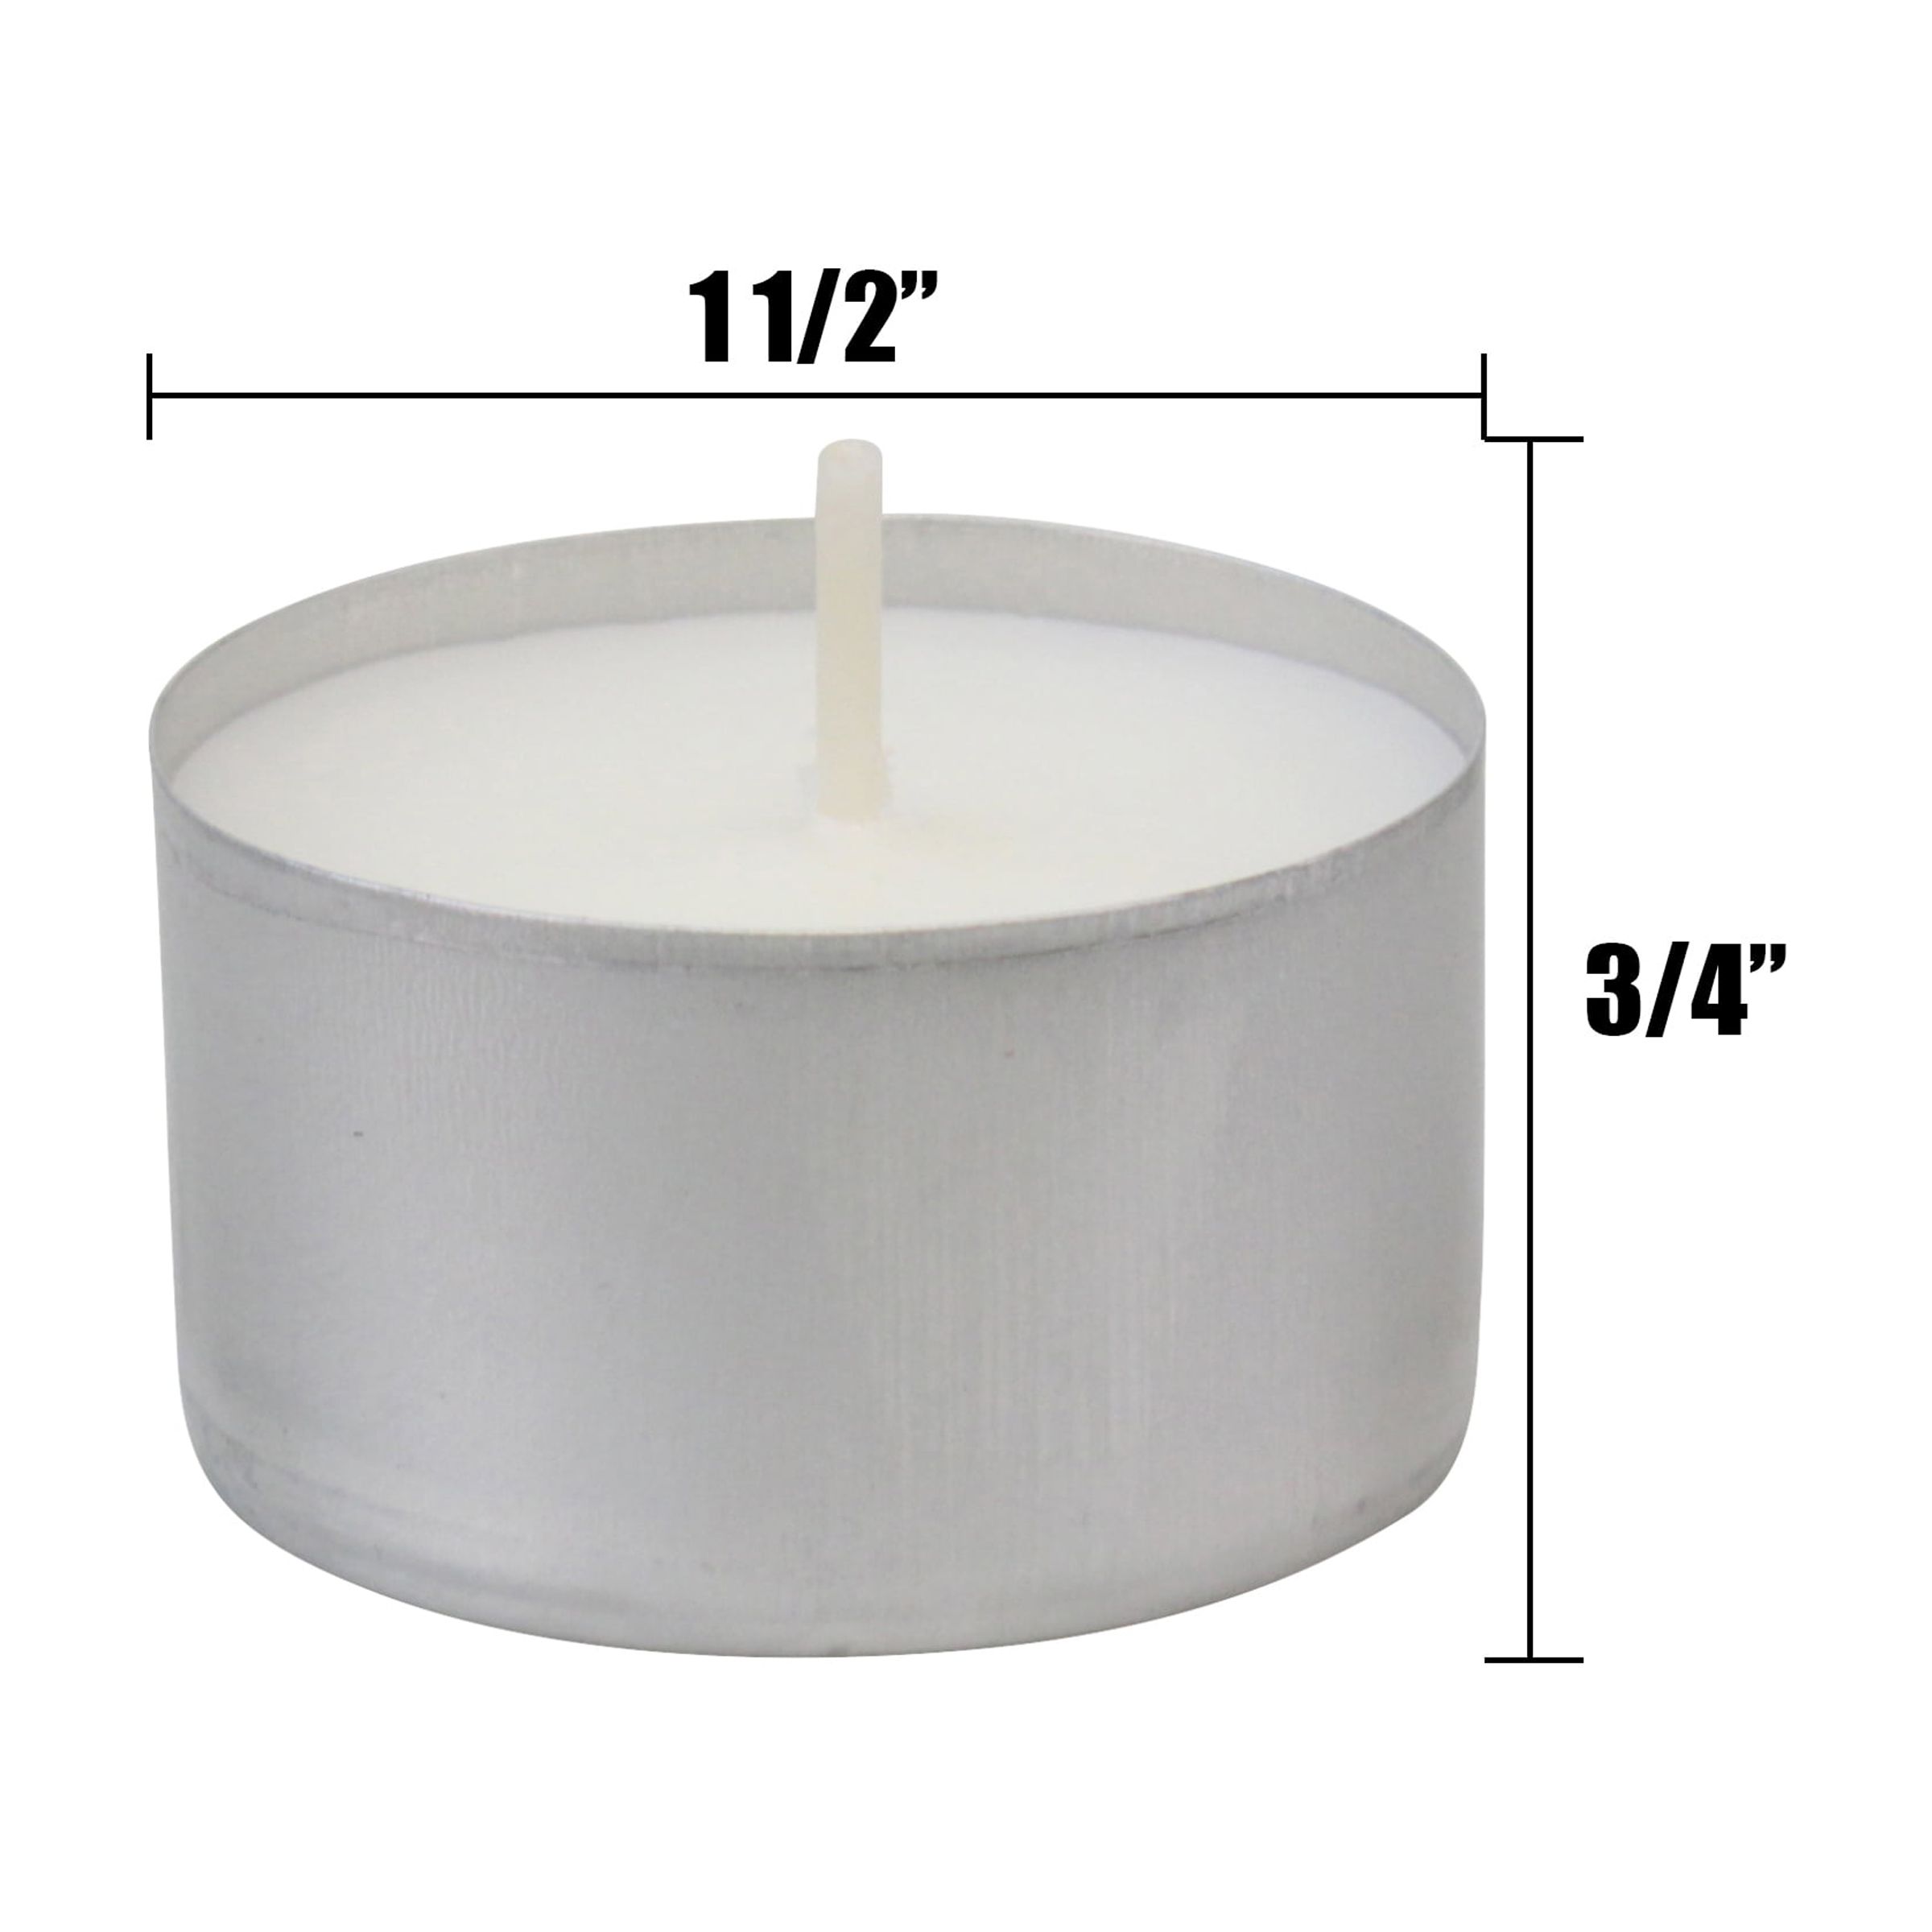 Stonebriar Unscented Long Burning Tealight Candles with 6-7 Hour Burn Time, 200 Pack, White - image 5 of 8